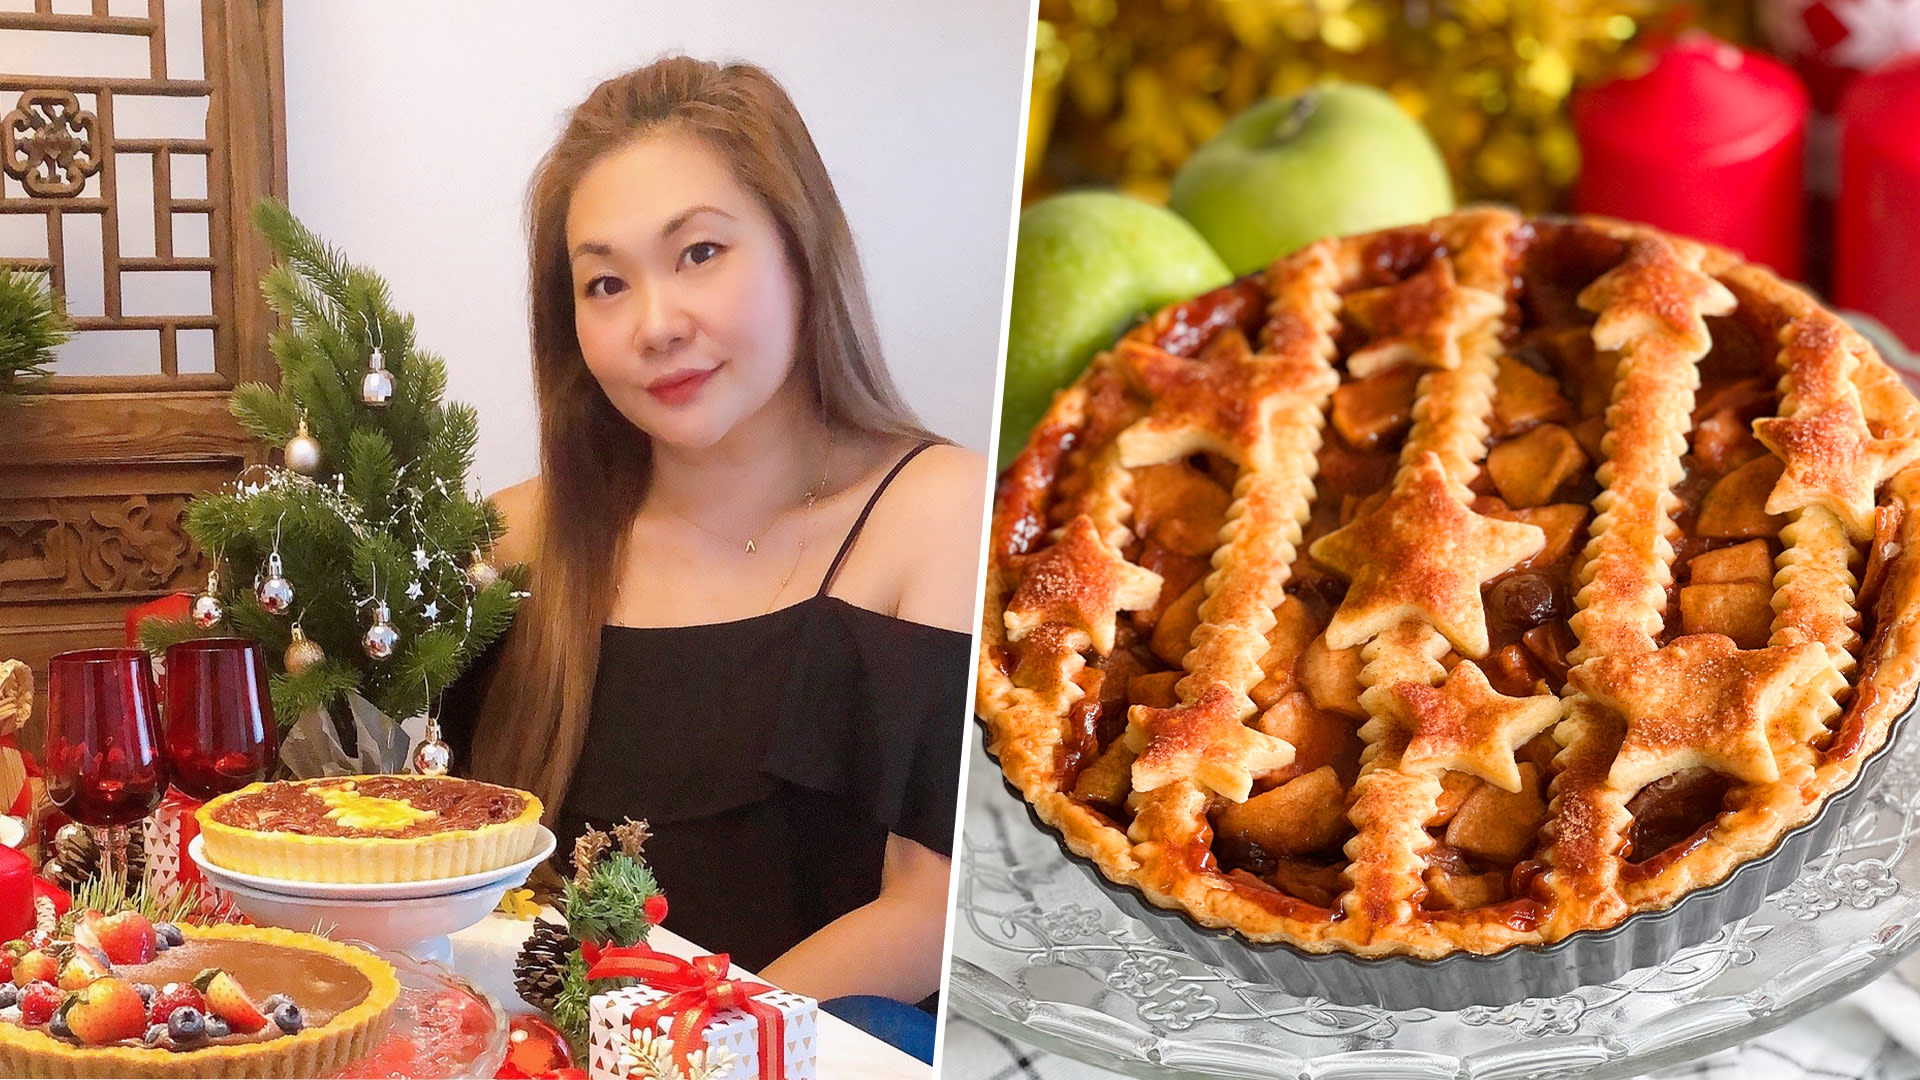 Ex-Costume Designer Who Styled Zoe Tay To Look Like An “Auntie” Now Sells Tasty Apple Pies